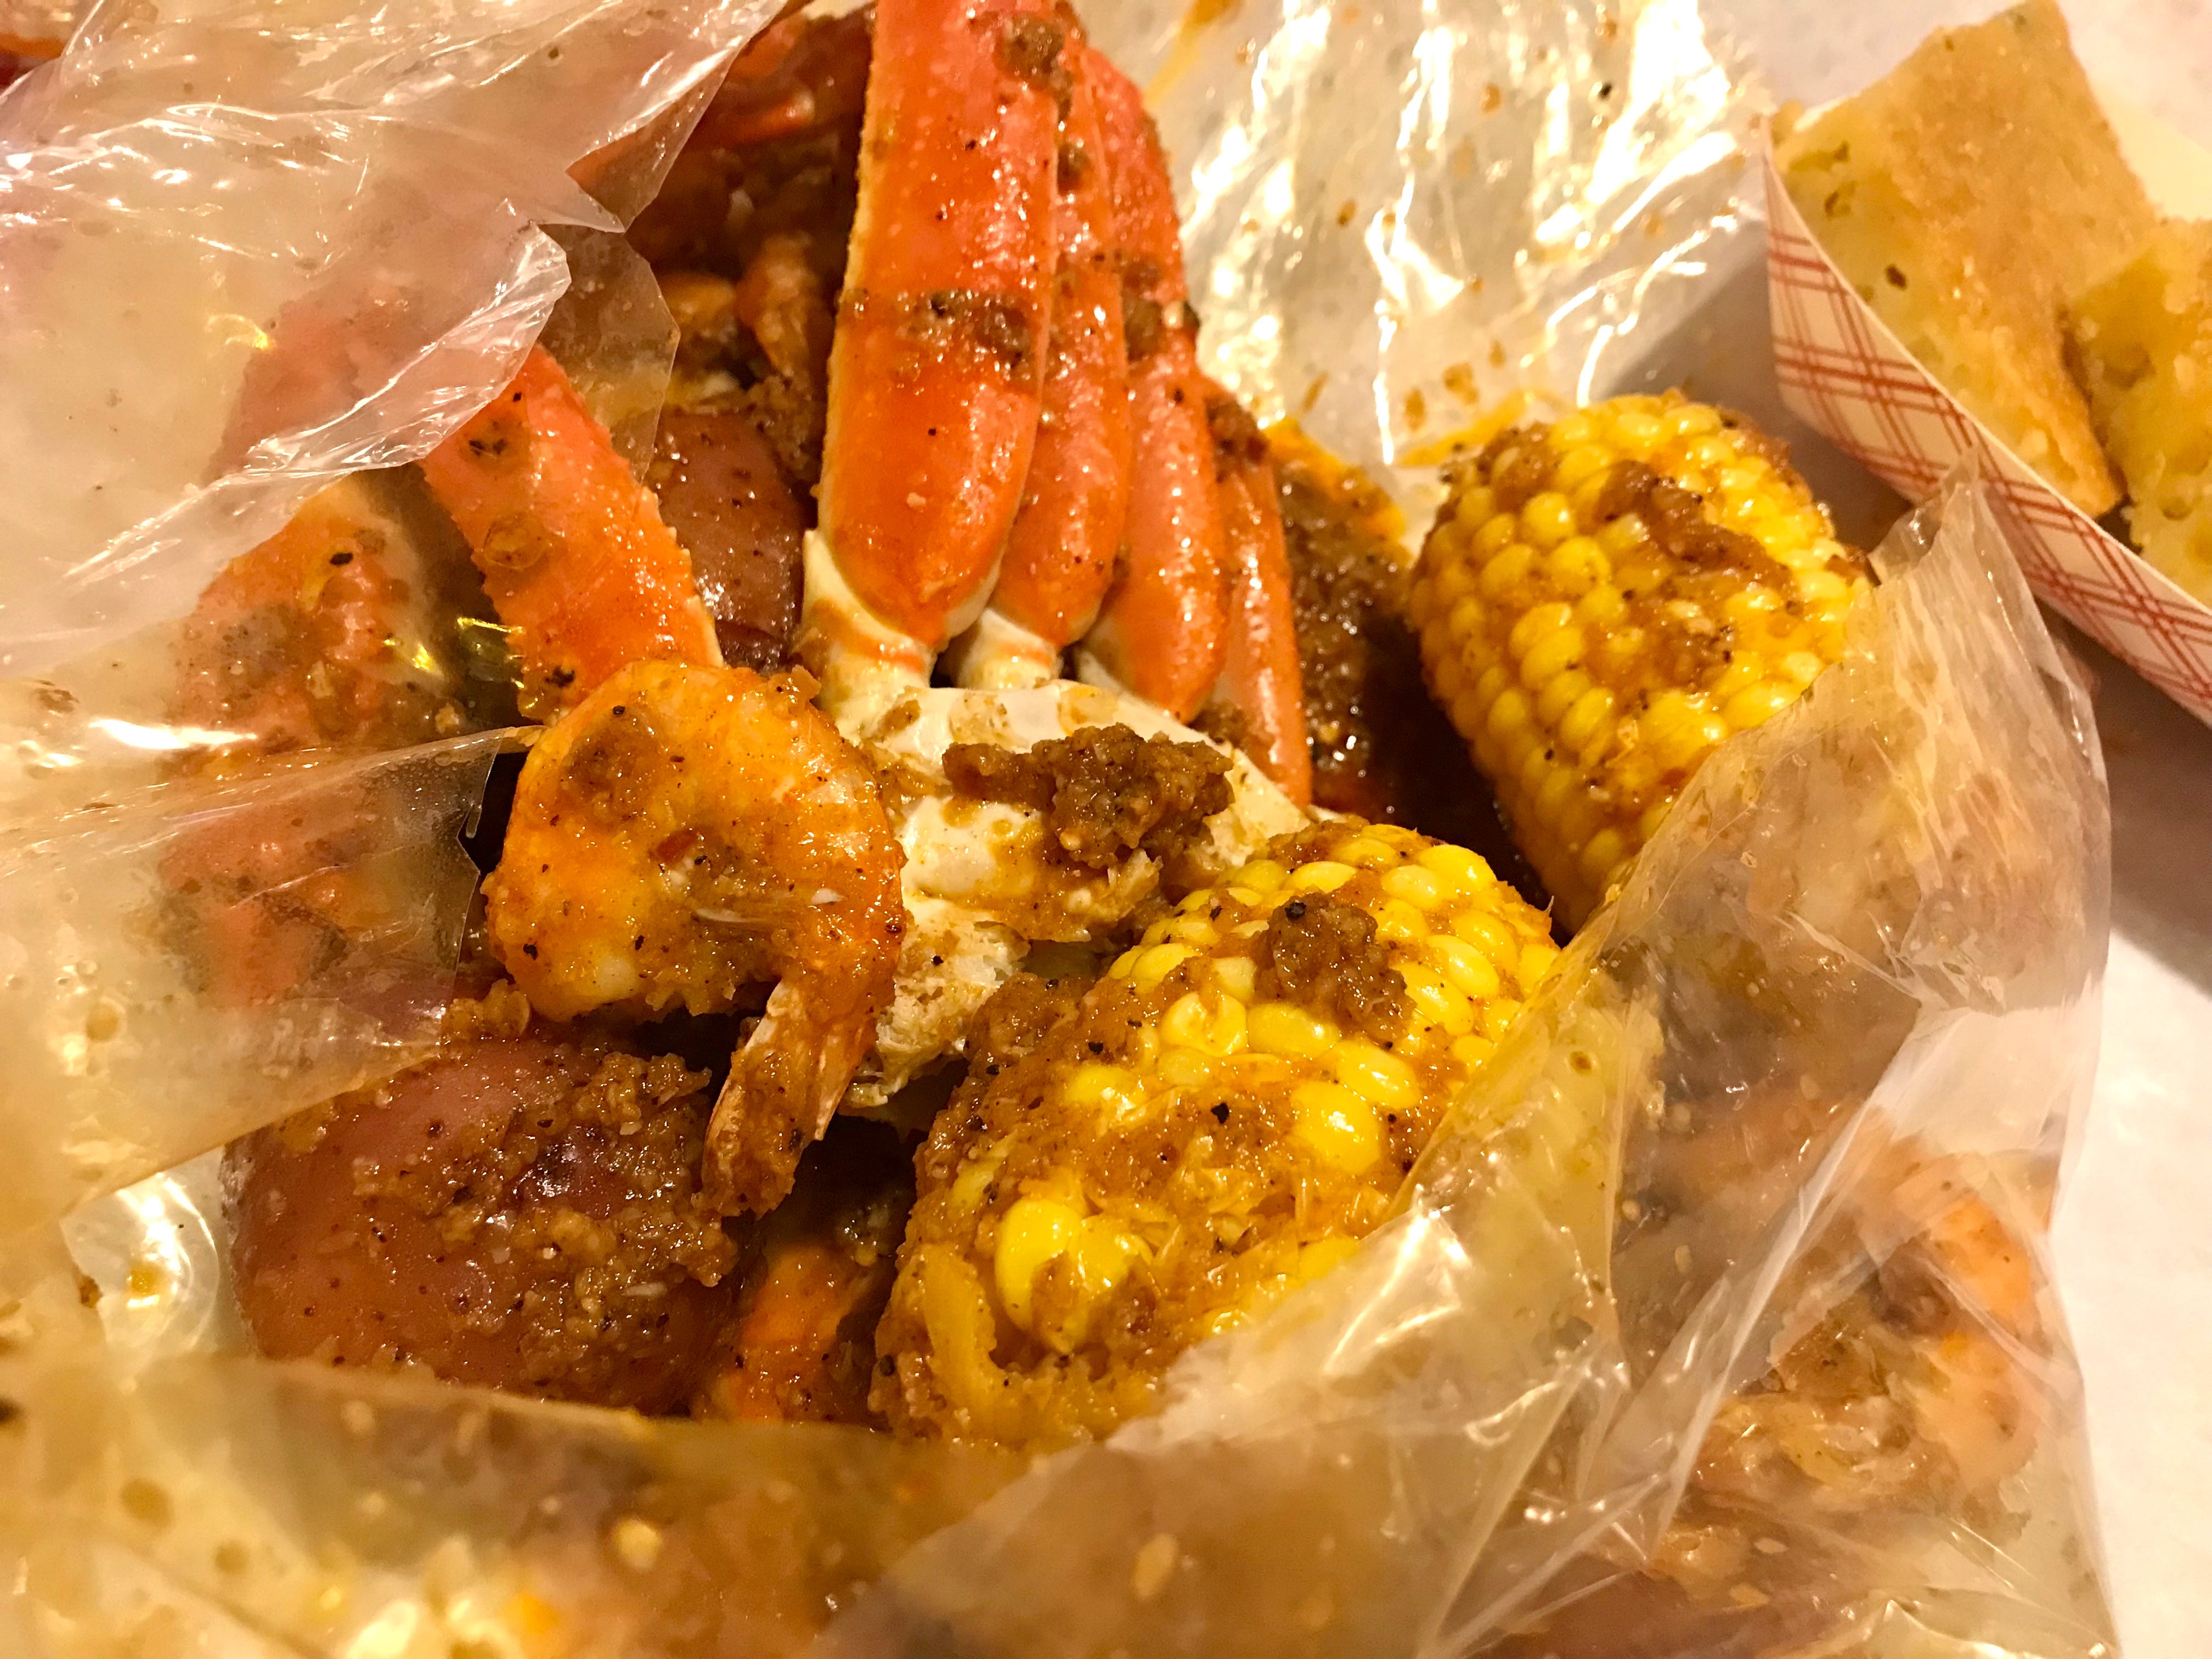 The Pay Day, a shrimp and snow crab combo in Cajun sauce at Lowcountry downtown.